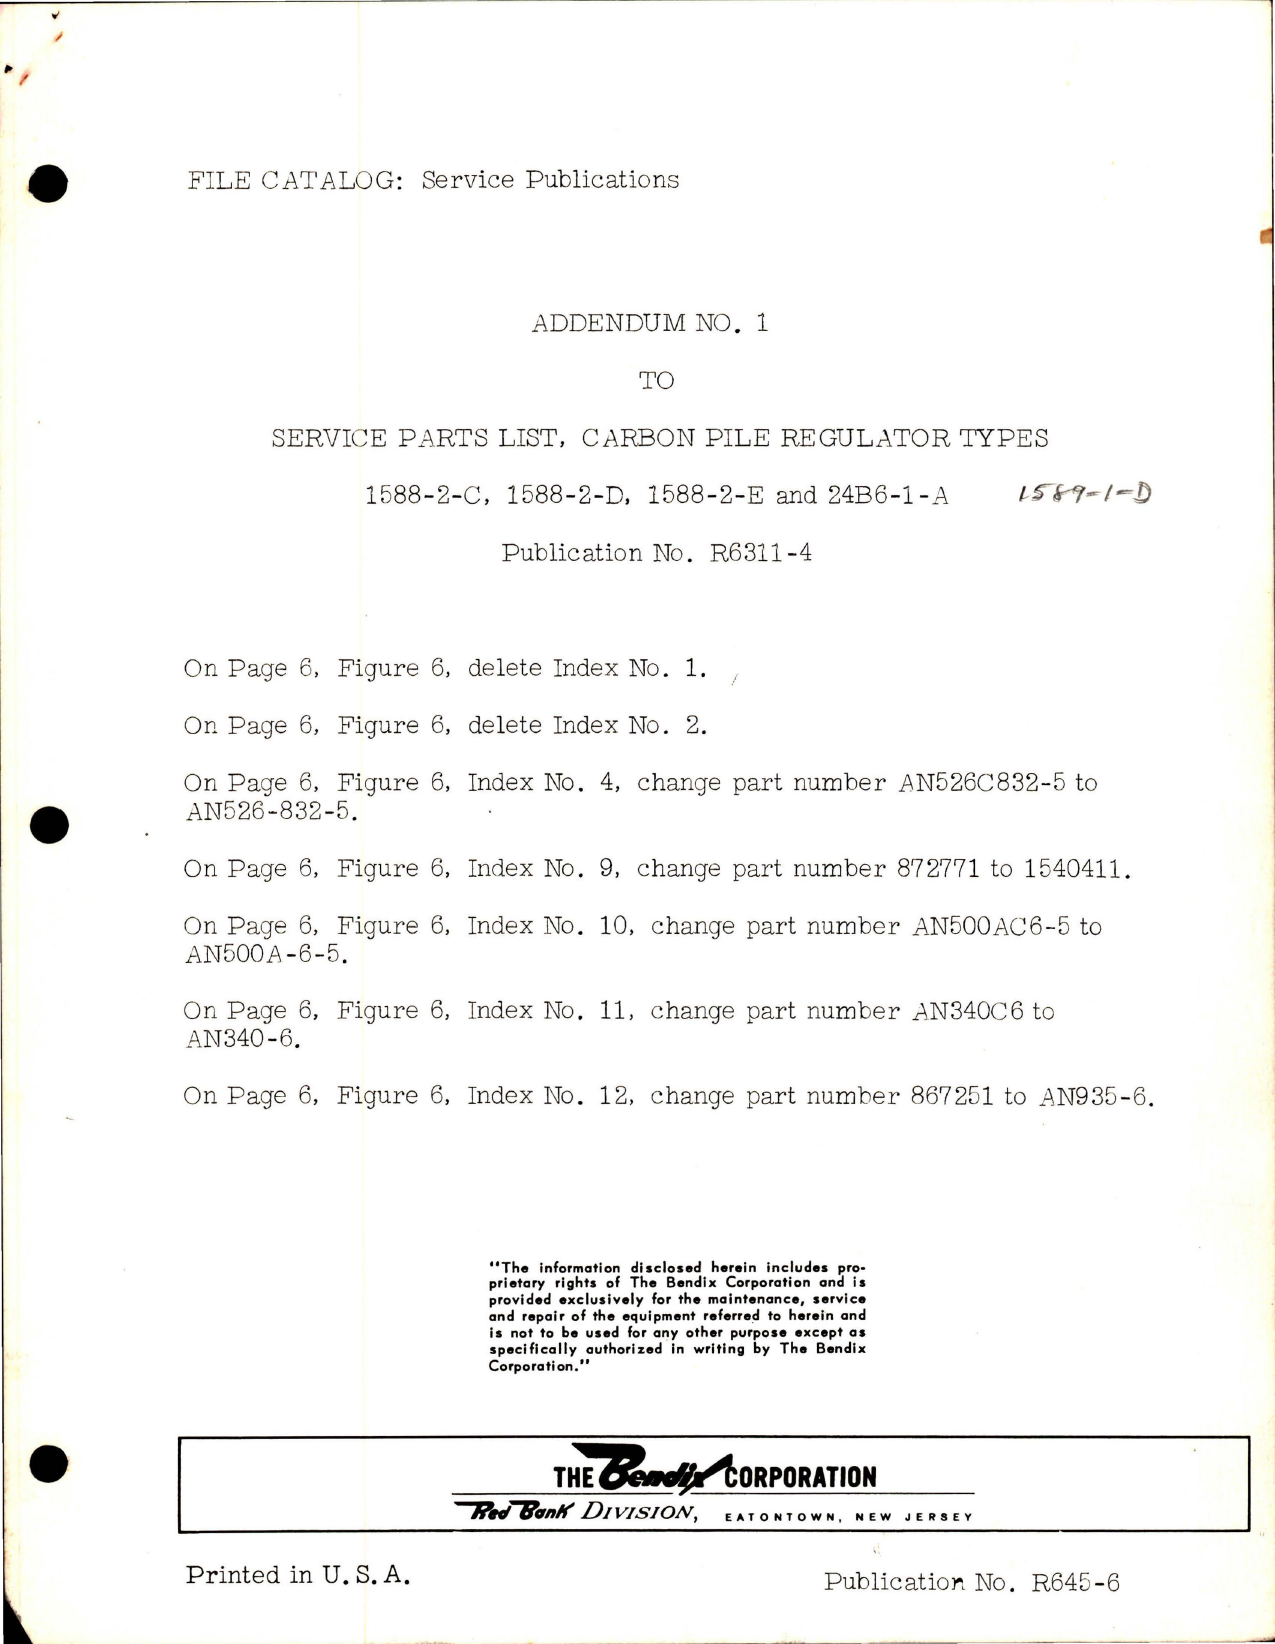 Sample page 1 from AirCorps Library document: Addendum No. 1 to Publication No. R6311-4 - Service Parts List for Carbon Pile Regulator